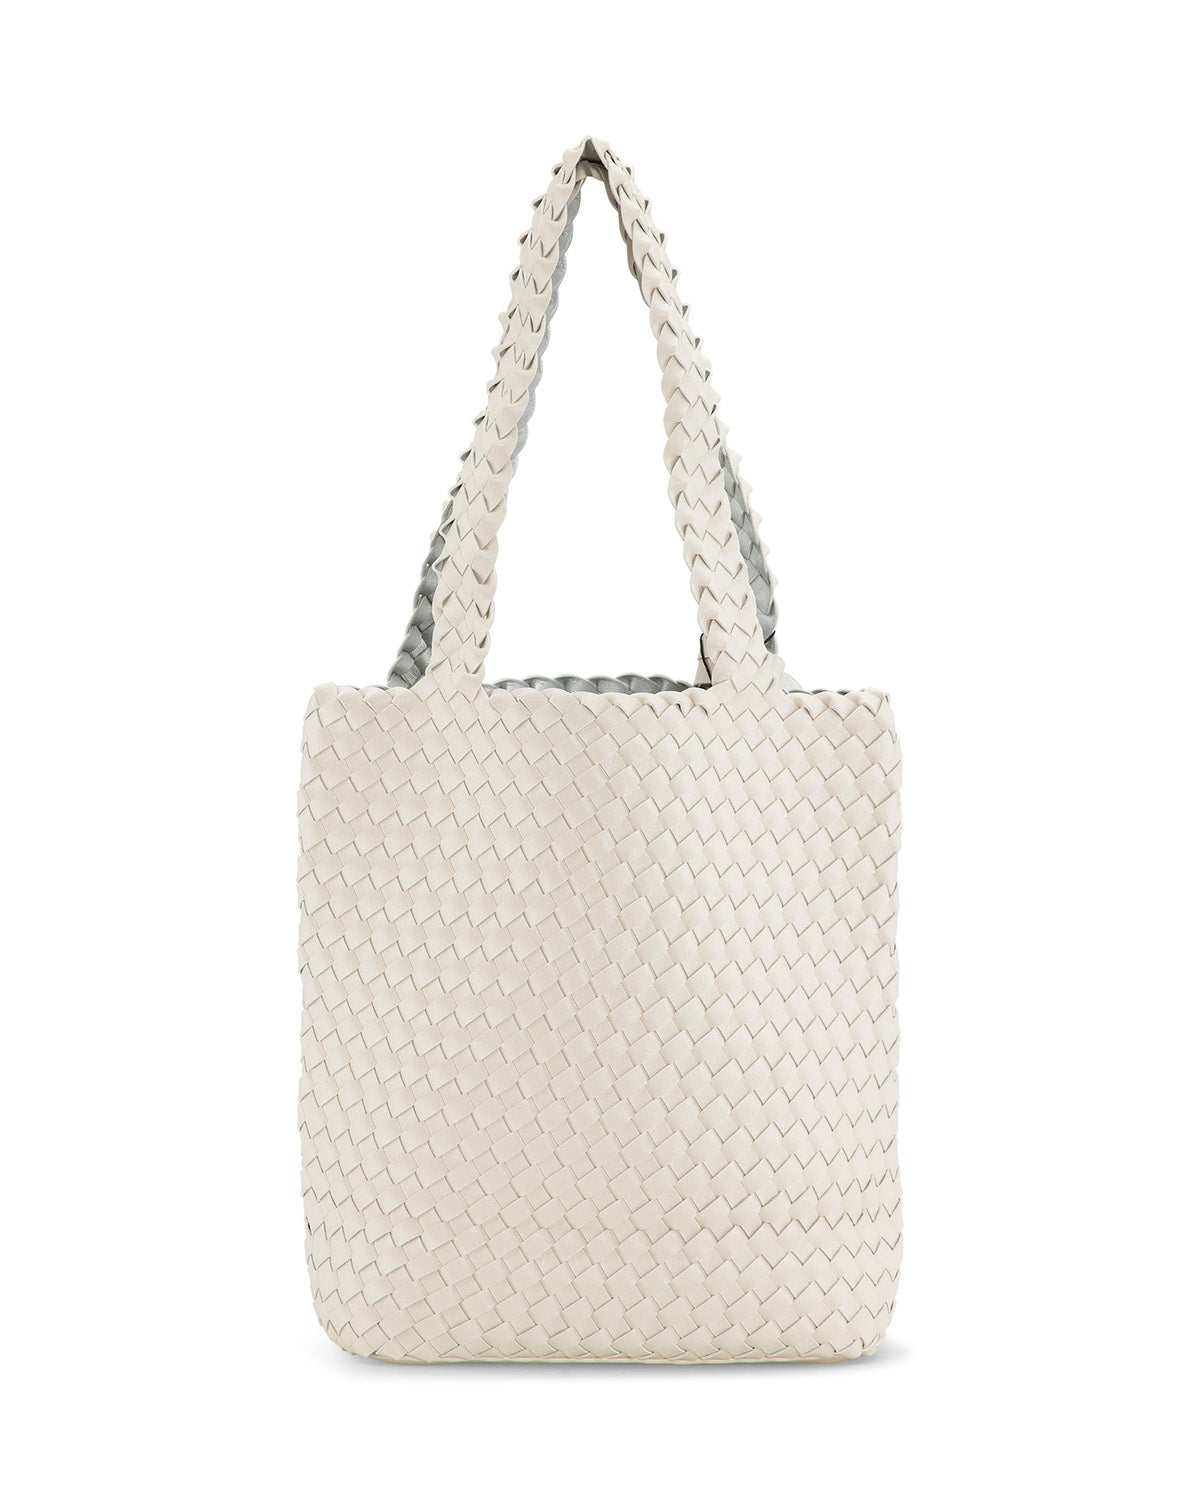 Tote bag in color egg white by Ilse Jacobsen